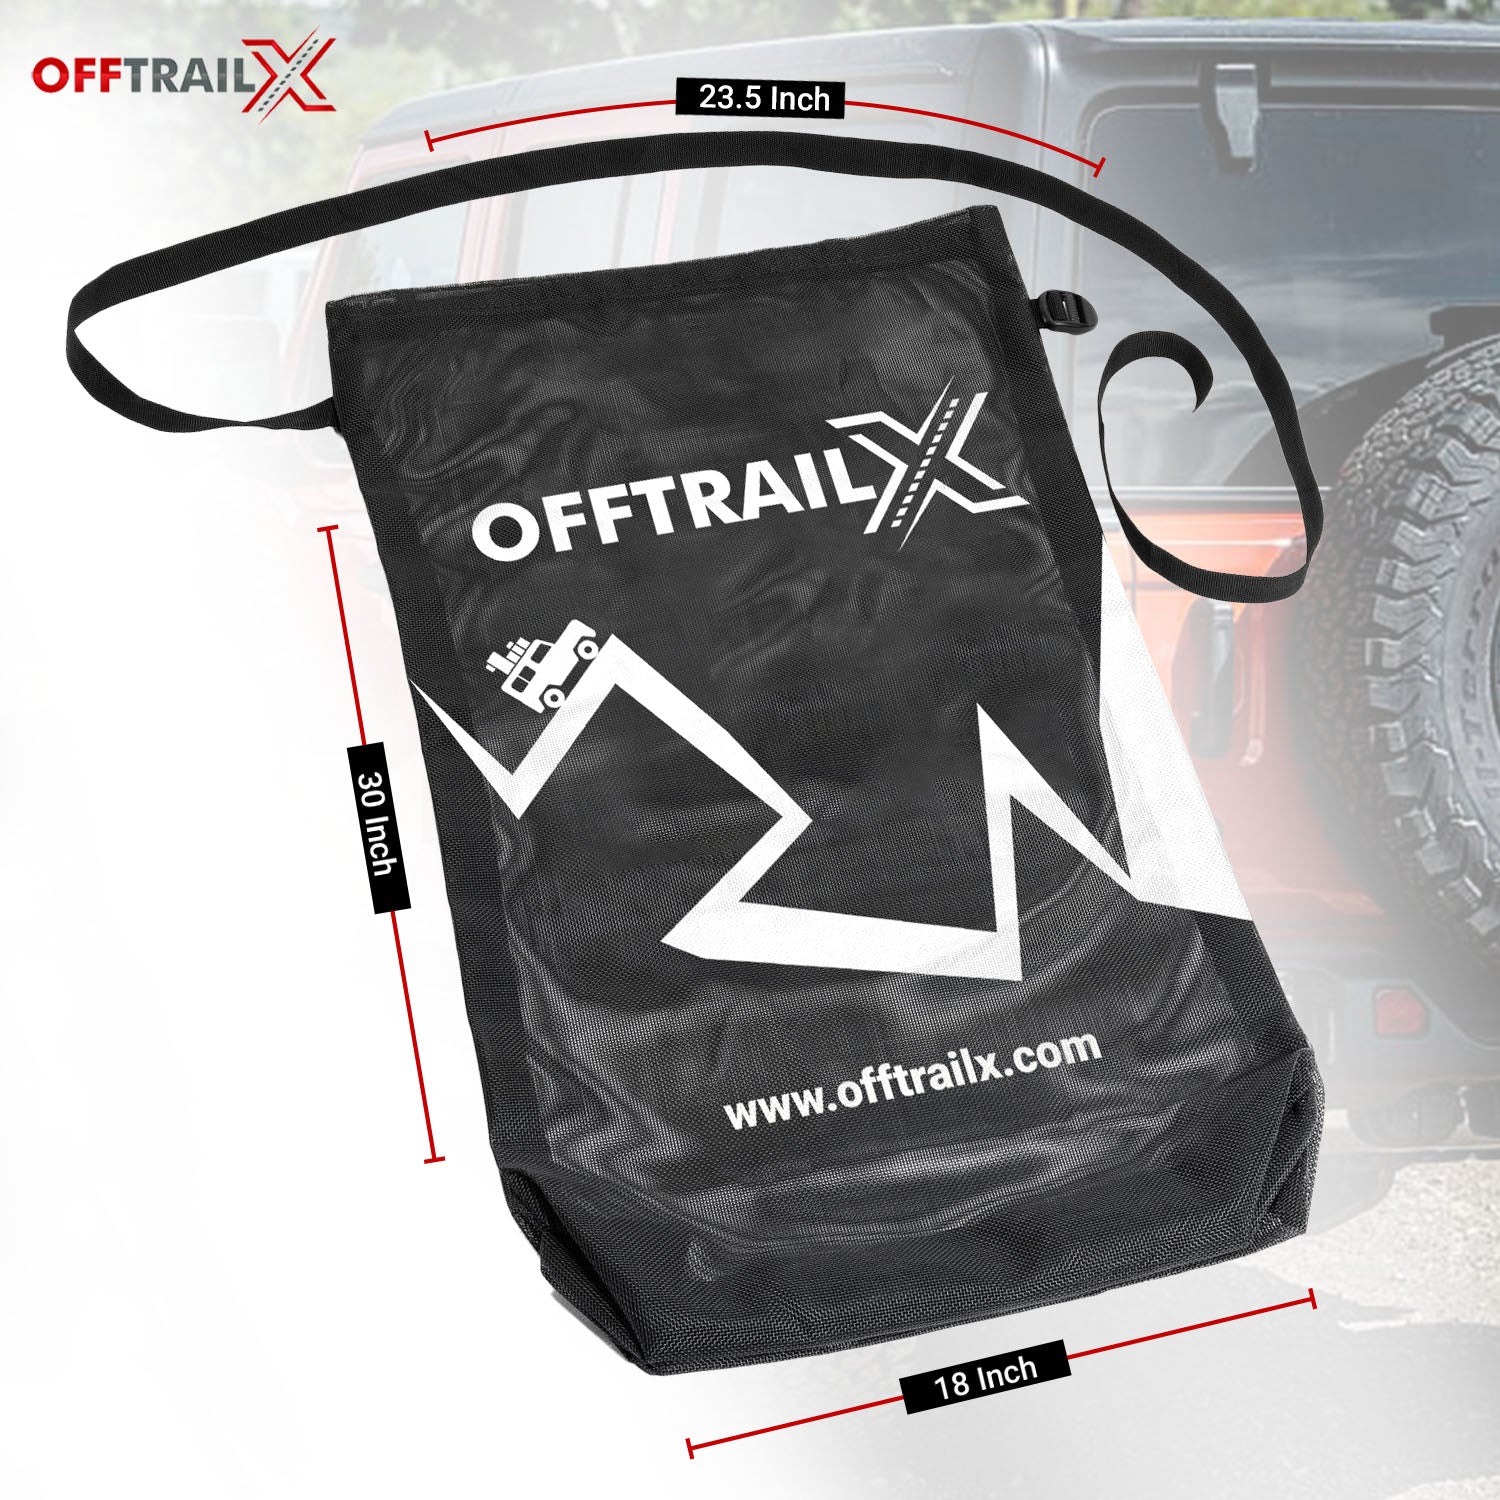 Offtrailx Spare Tire Storage Bag for Offroad, Jeep and SUV